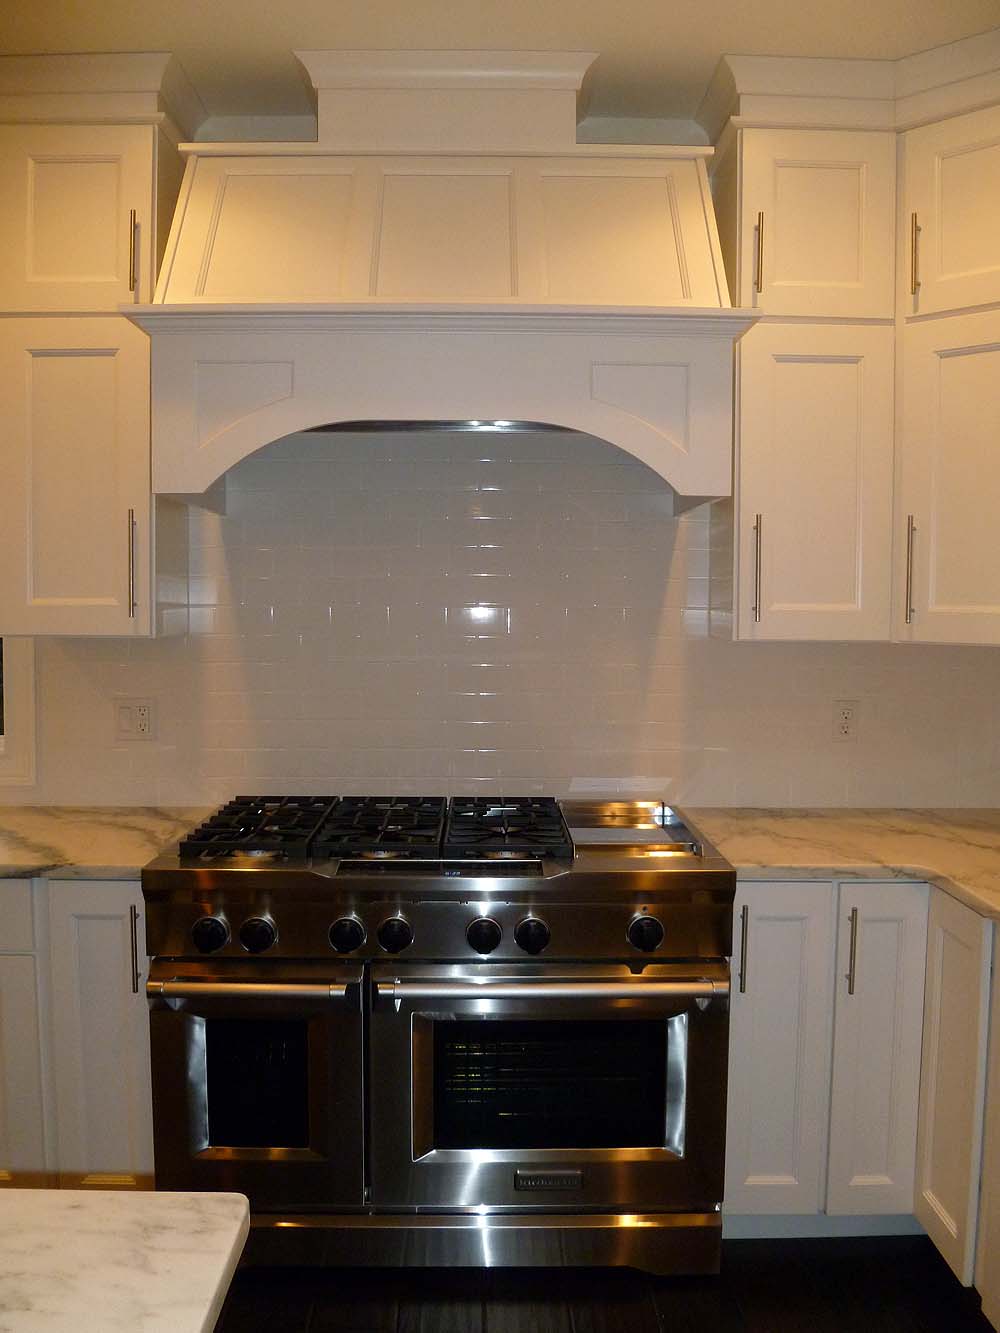 Commercial style range with decorative vent hood